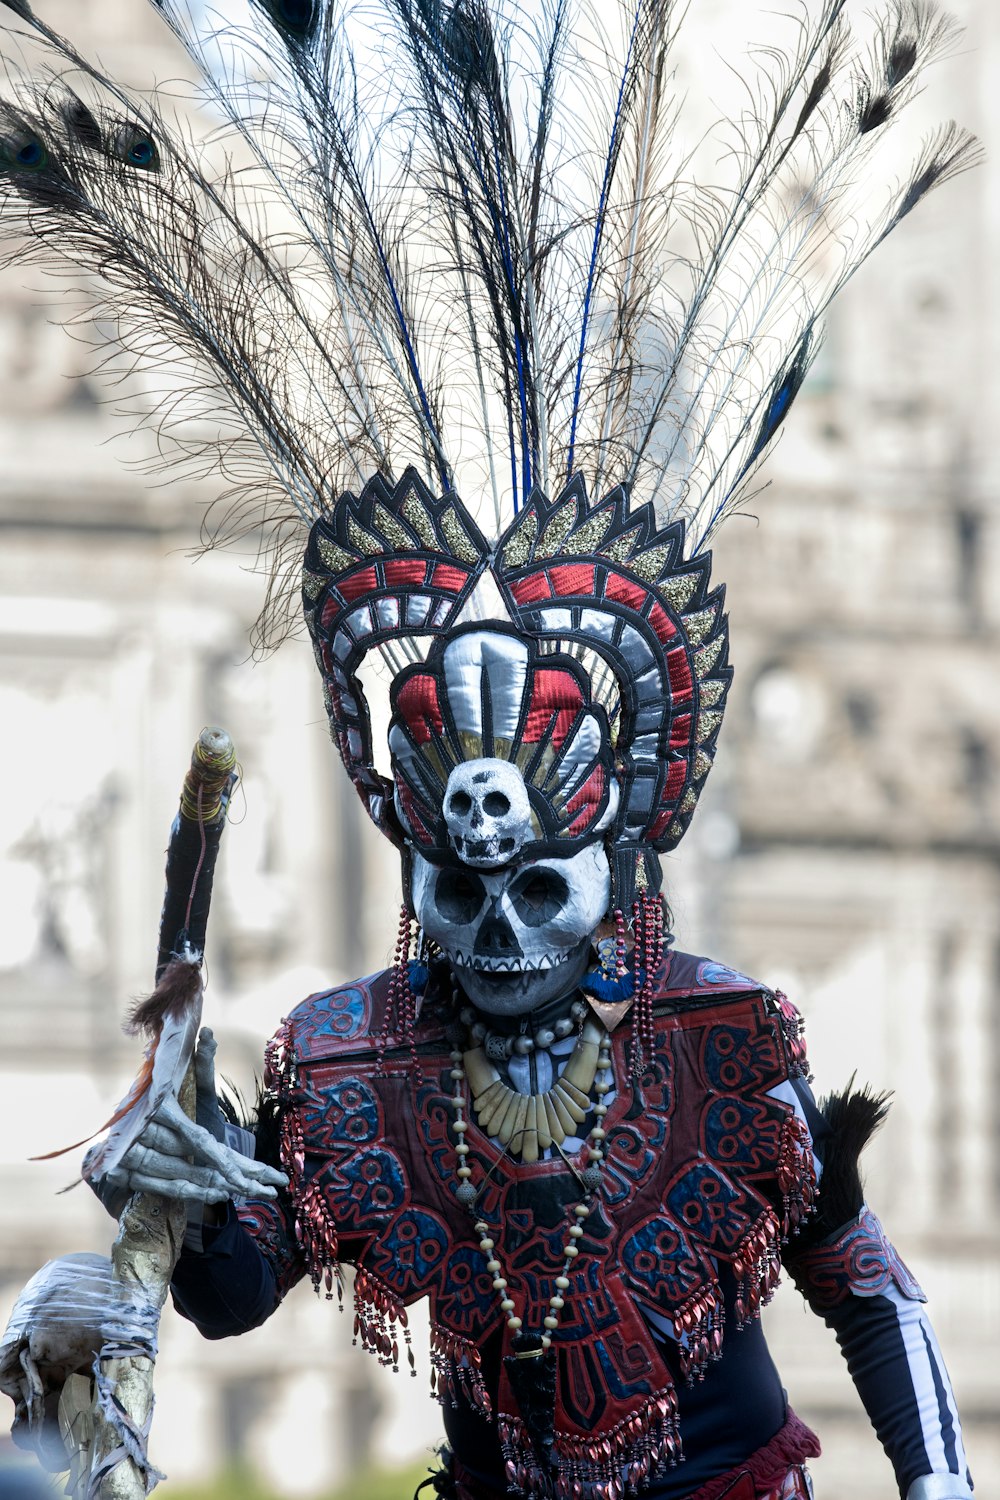 a man in a costume with feathers on his head